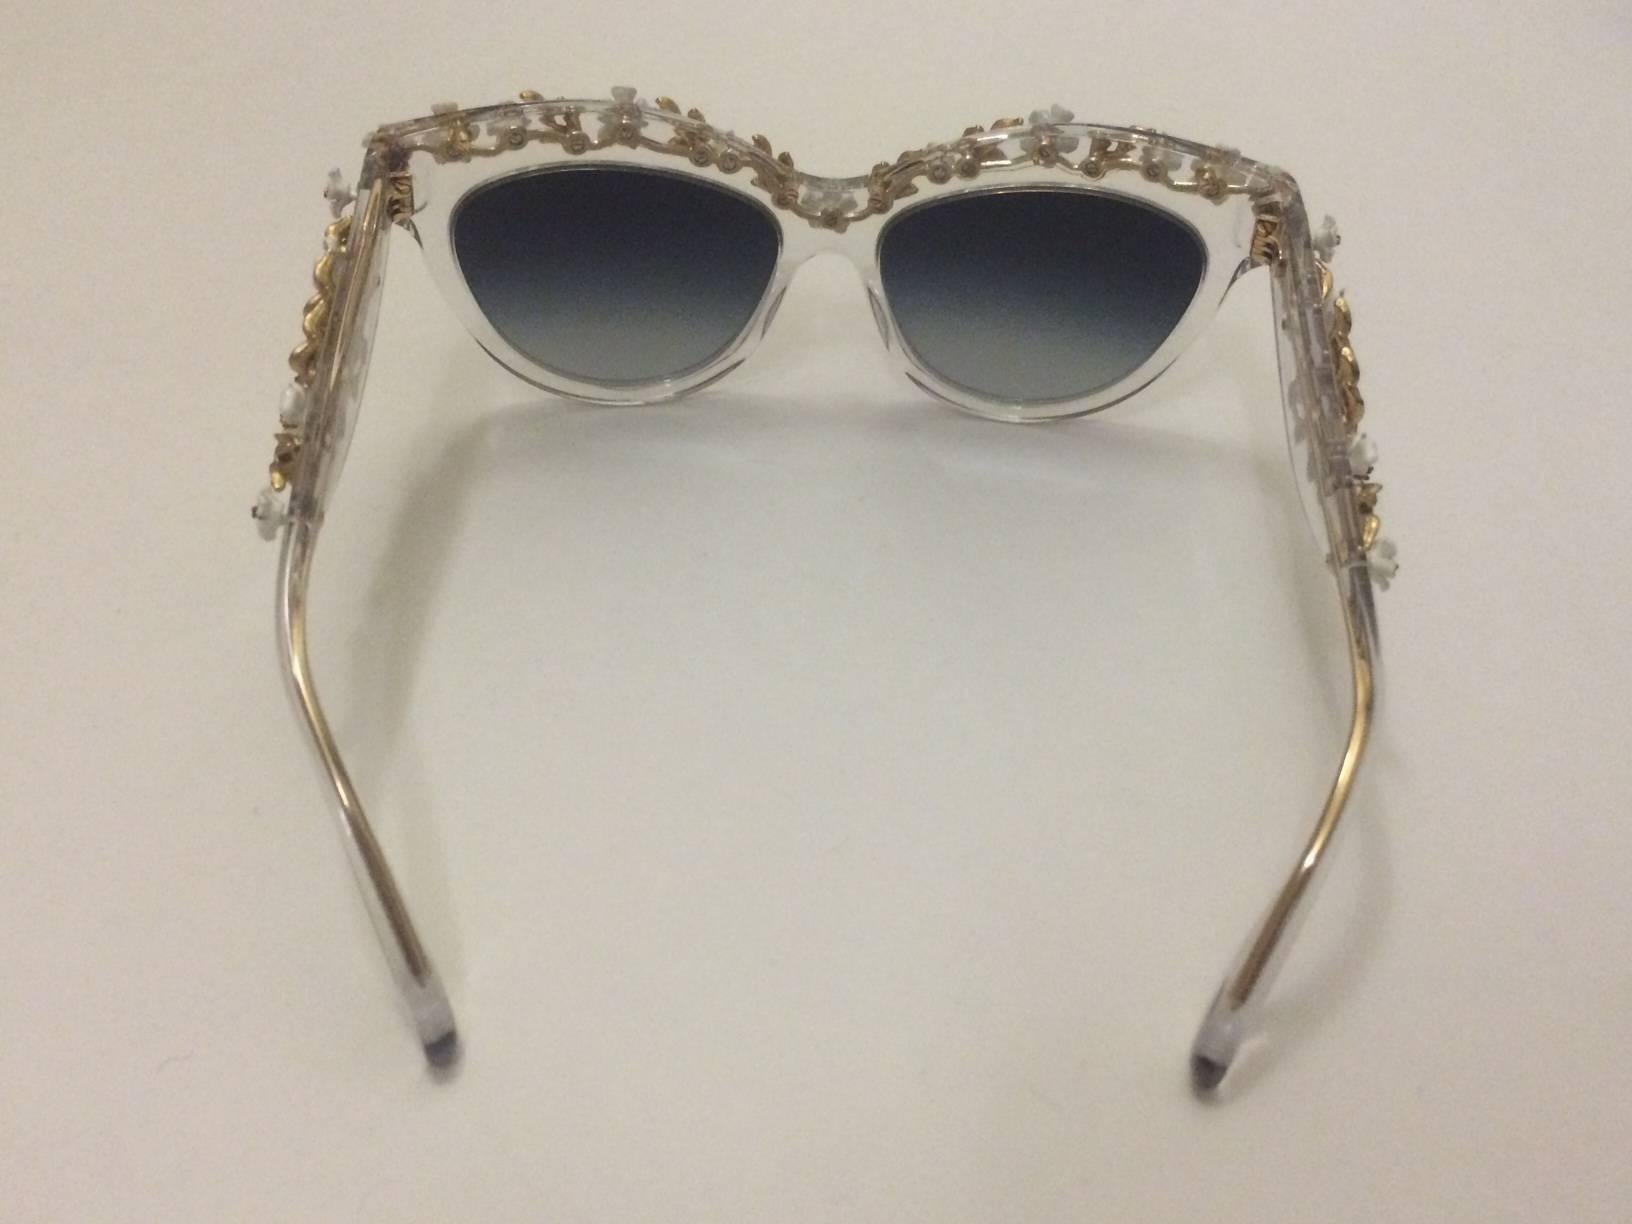 Women's Dolce & Gabbana Rare Clear Transparent Sunglasses with Floral Vine Metalwork